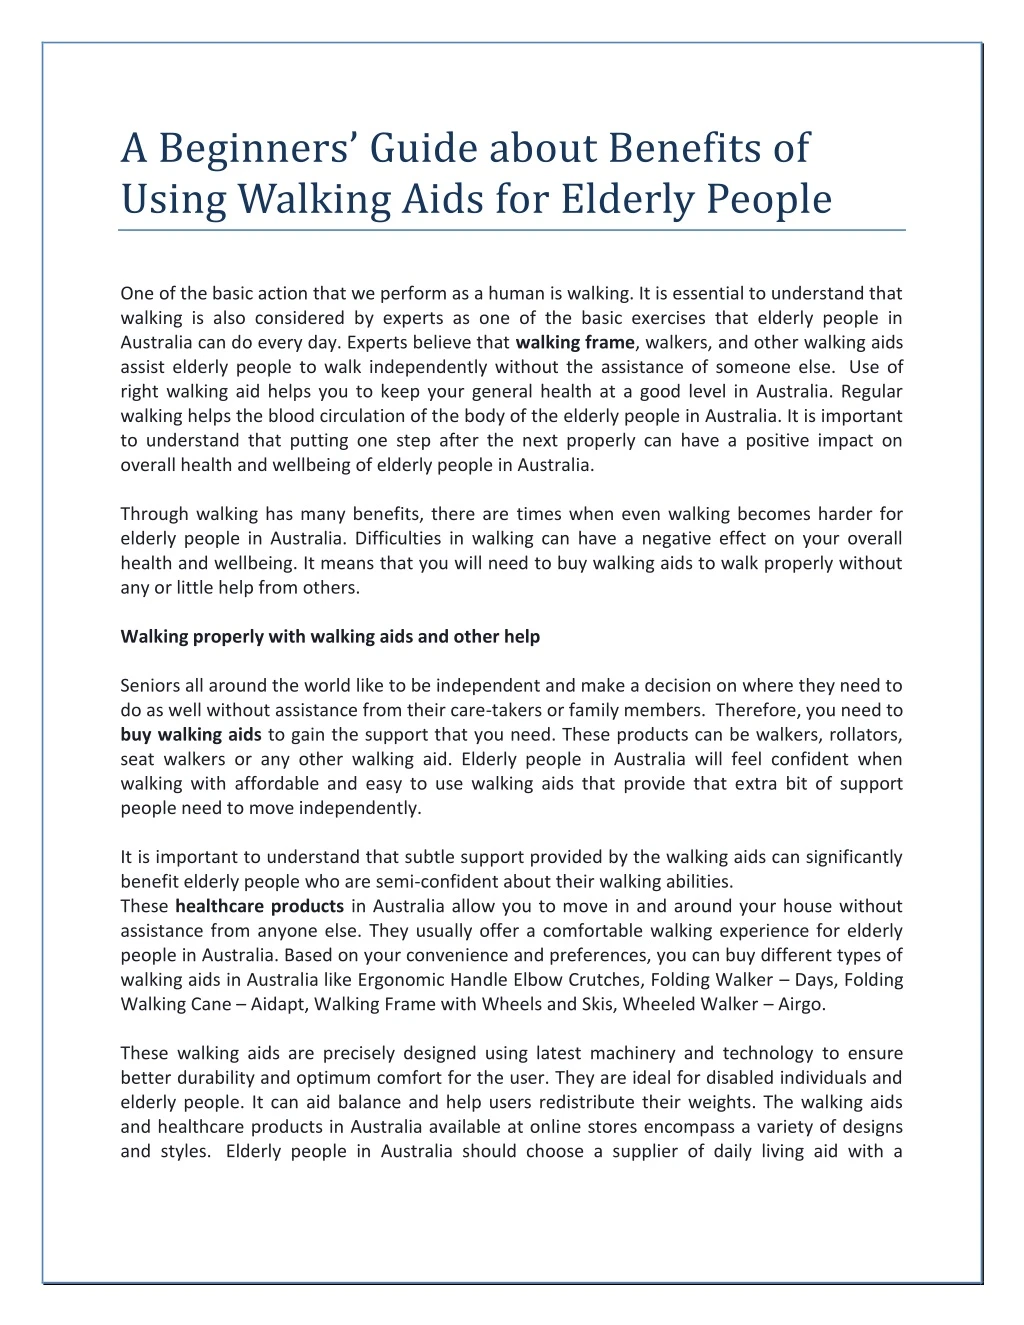 a beginners guide about benefits of using walking